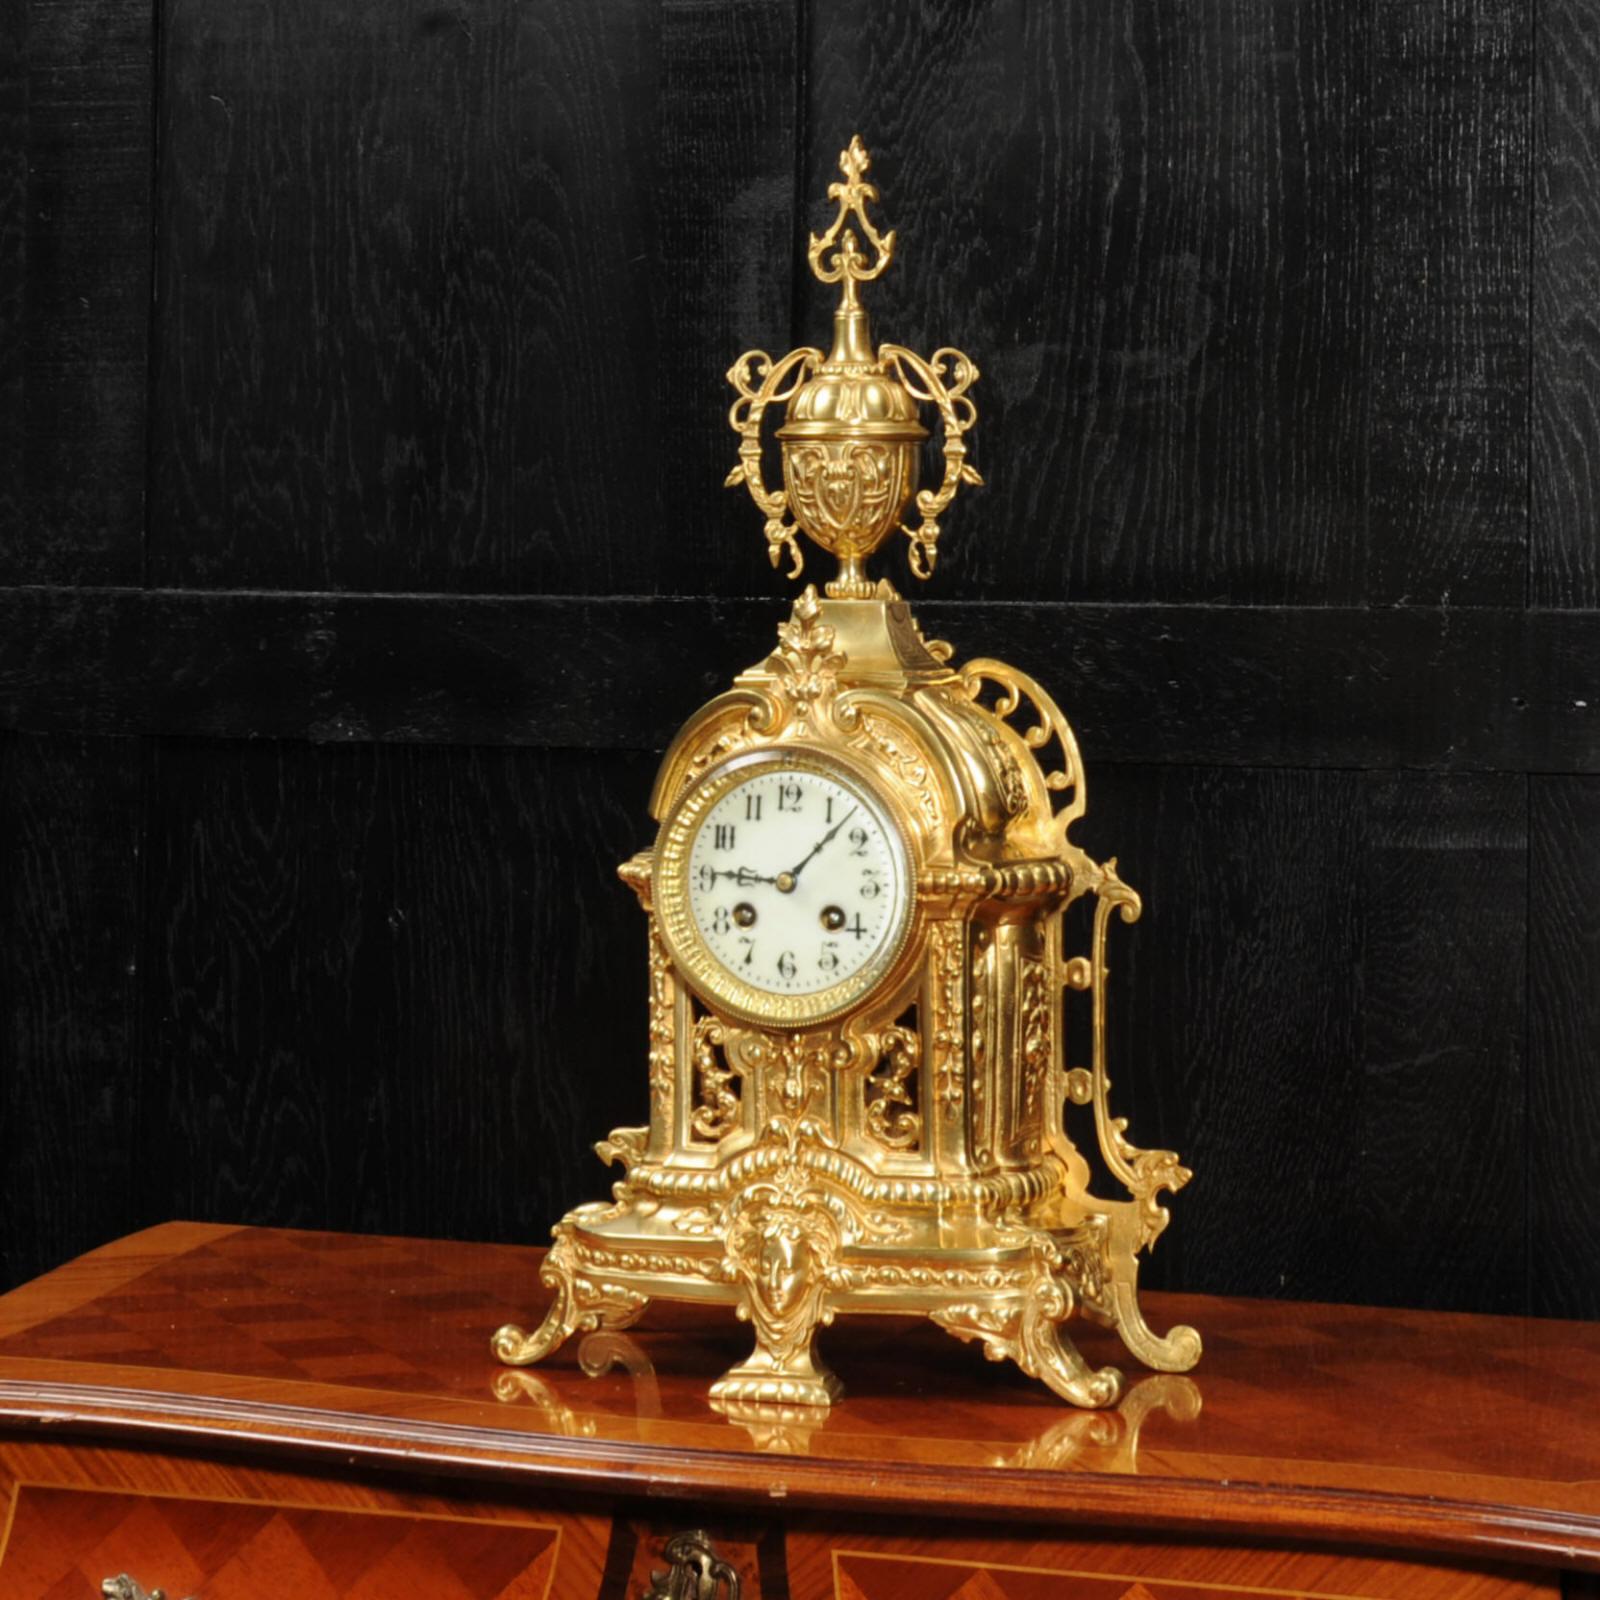 A lovely original antique French gilt bronze clock, beautifully modelled in the Baroque style and dating from around 1900. Decorated with scrolling acanthus, a goddess mask and a large, elaborate urn. The front is fretted to lighten the design and